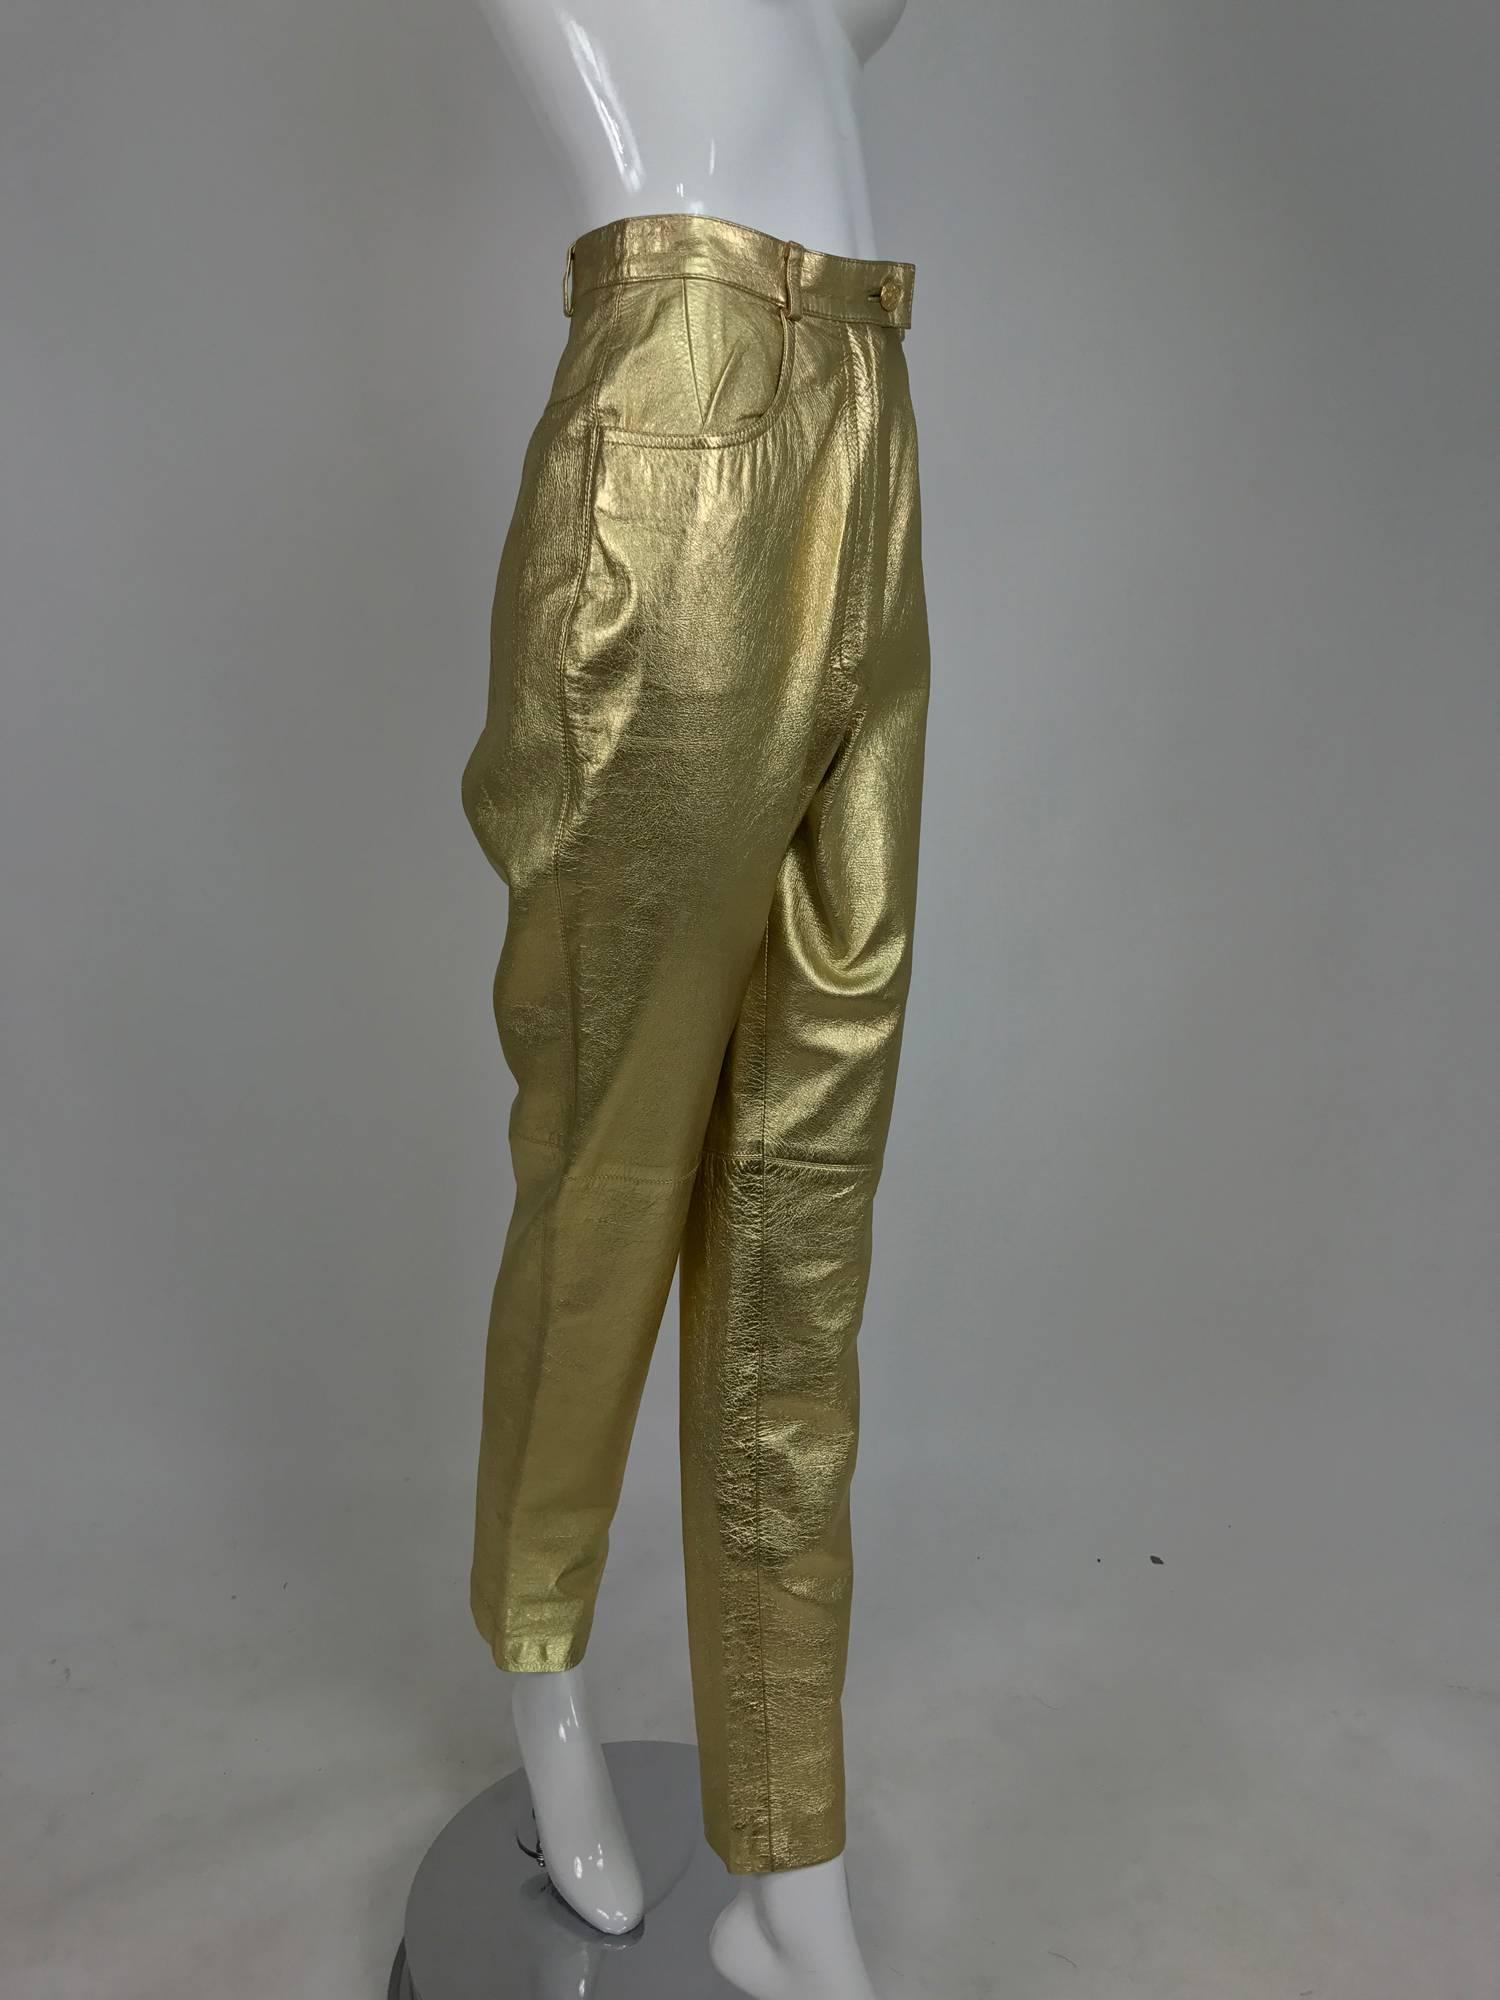 Vintage Ferragamo soft gold leather jeans style trousers 1980s 4